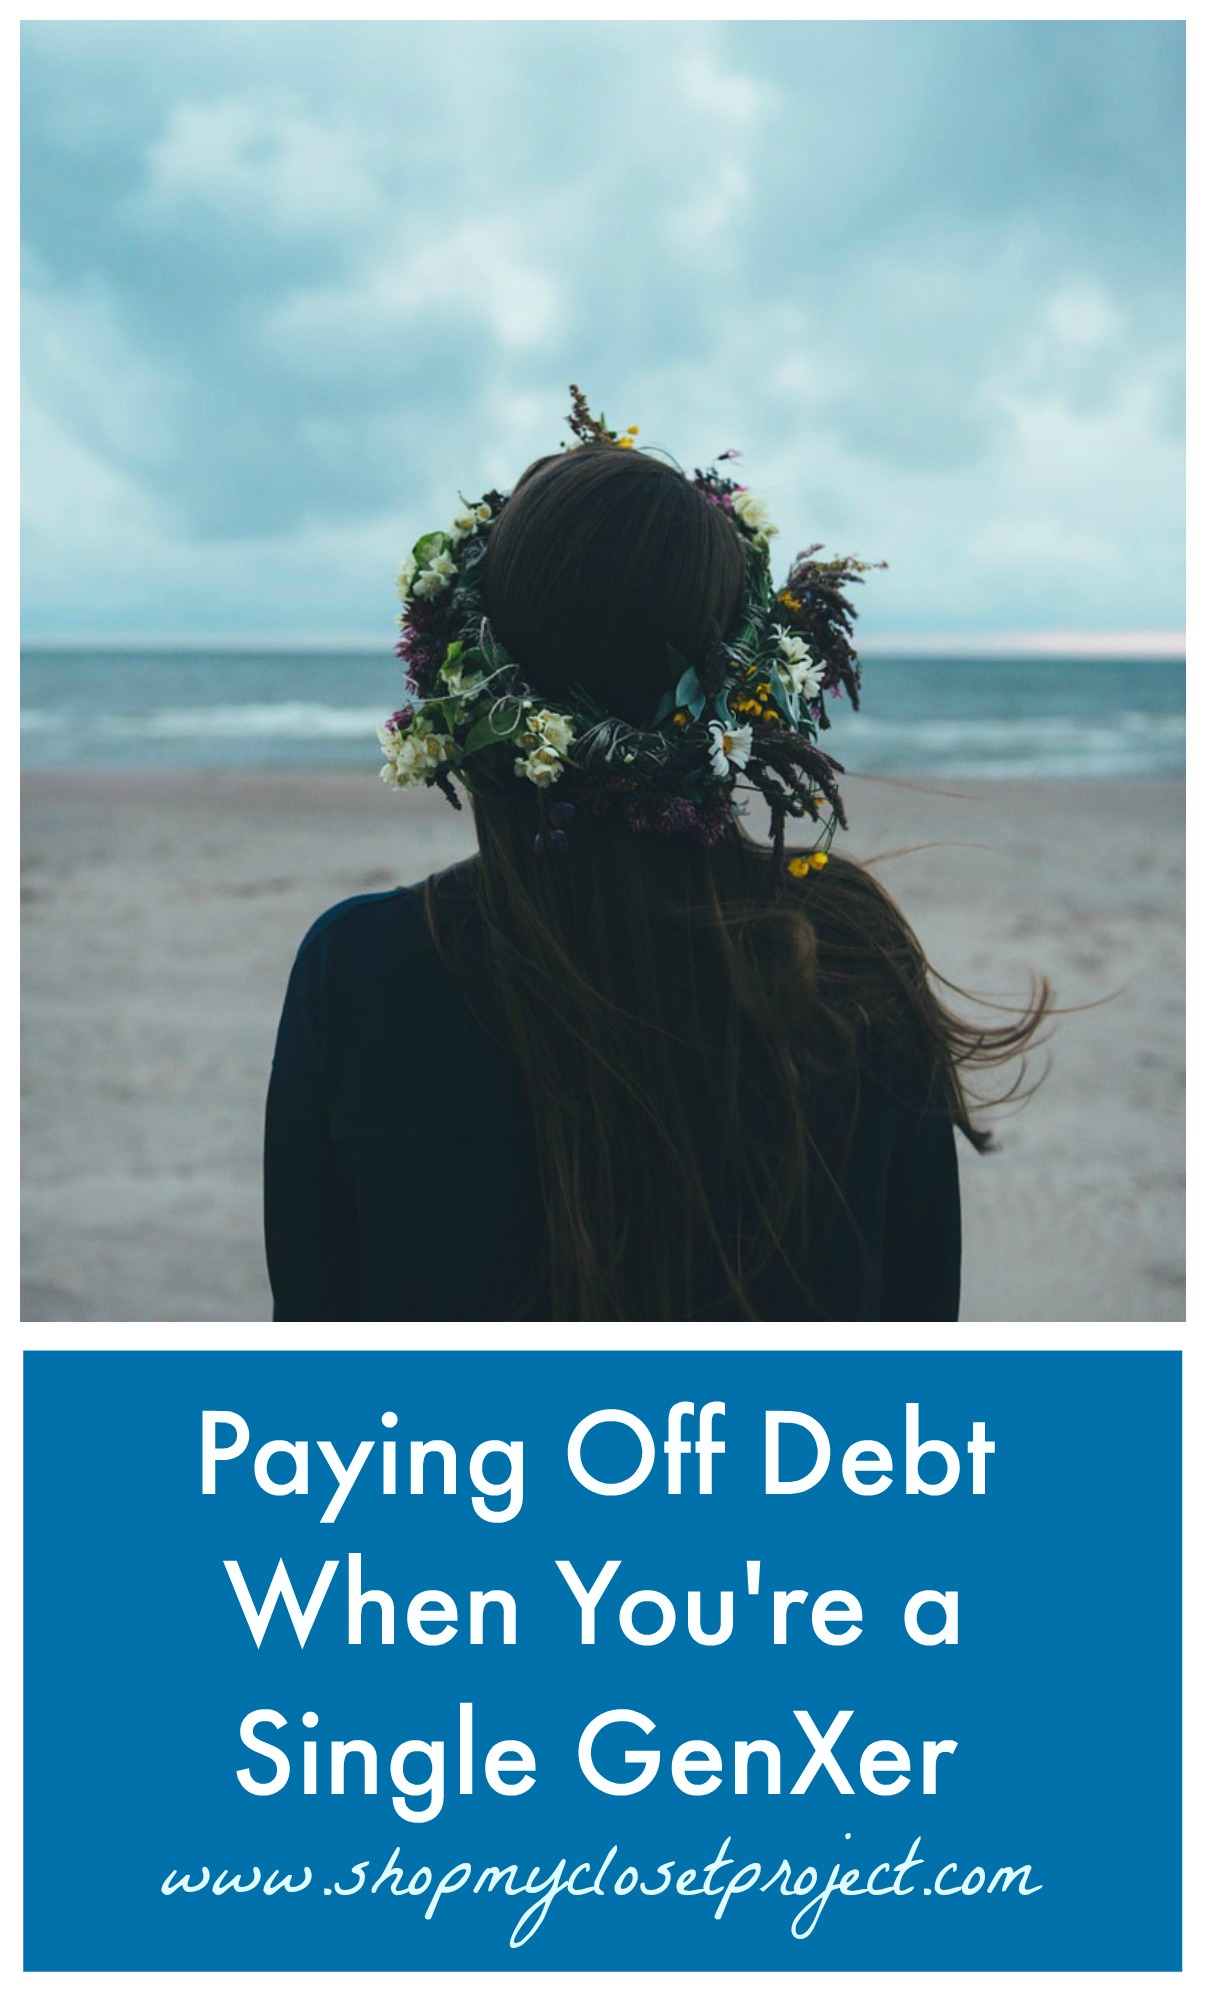 Paying Off Debt When You’re a Single GenXer